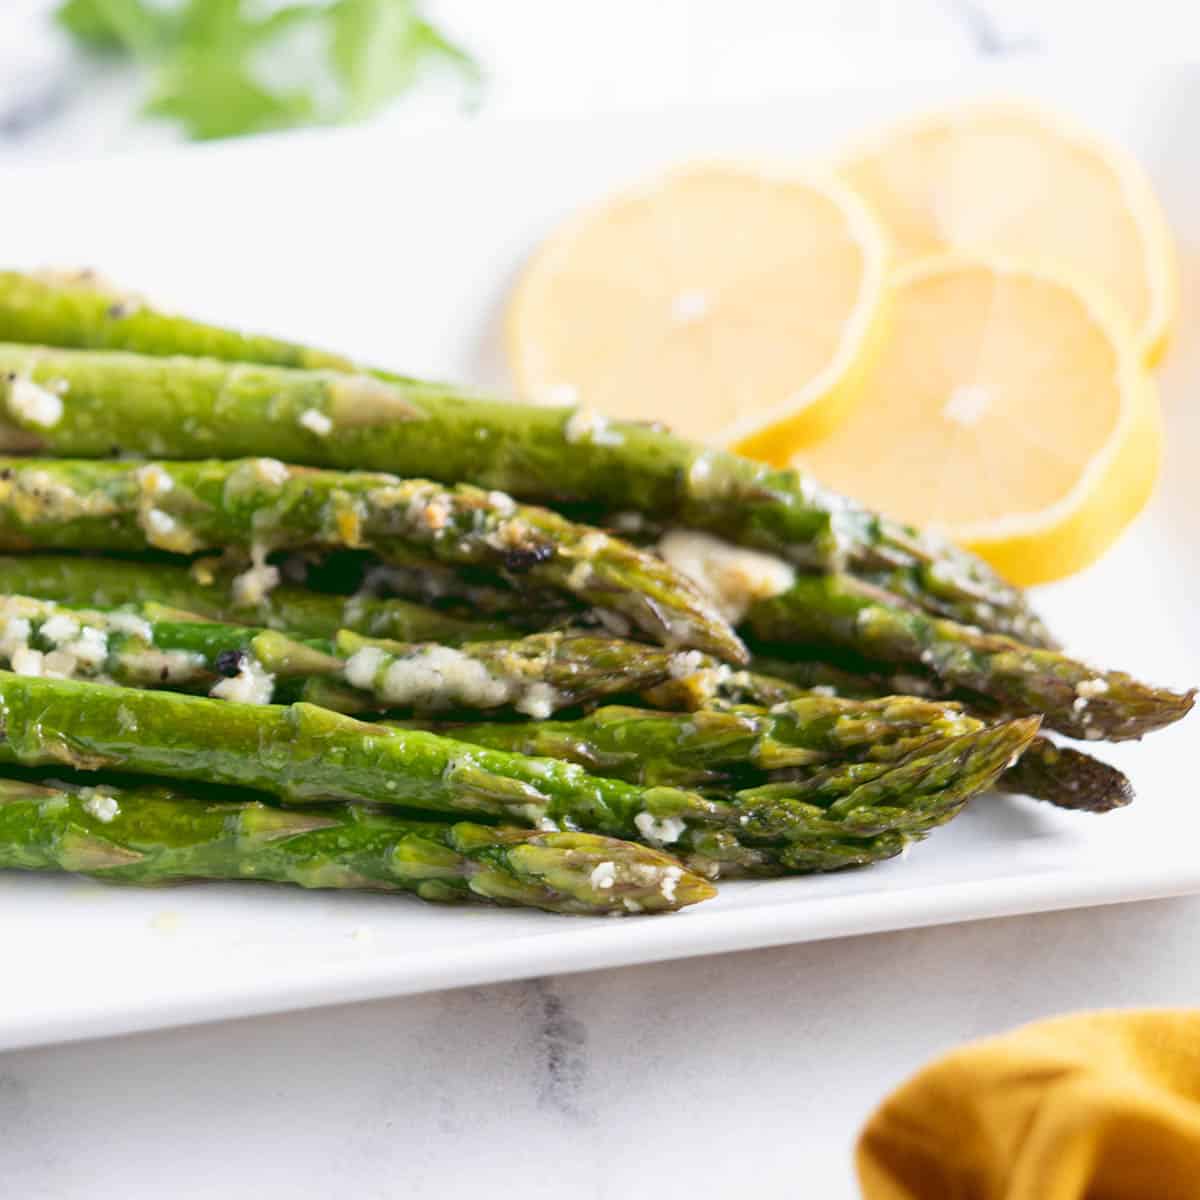 Slow Cooker Asparagus on a platter topped with melted cheese and garnished with lemon slices.